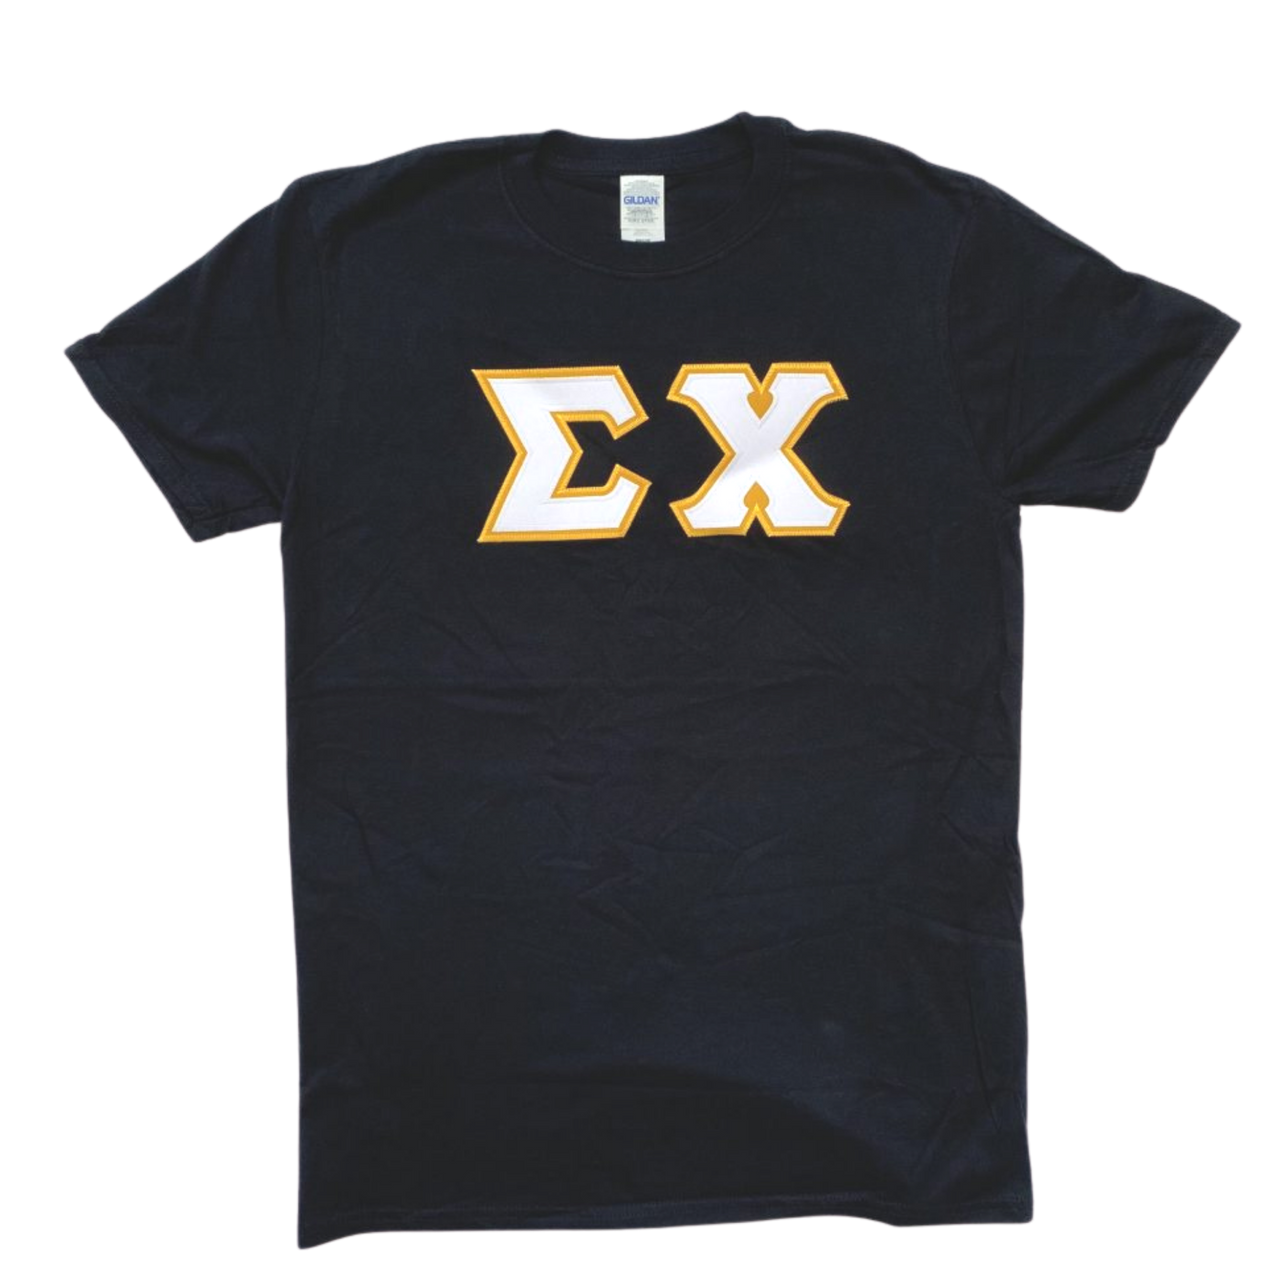 Sigma Chi Stitched Letter T-Shirt | Black | White with Gold Border